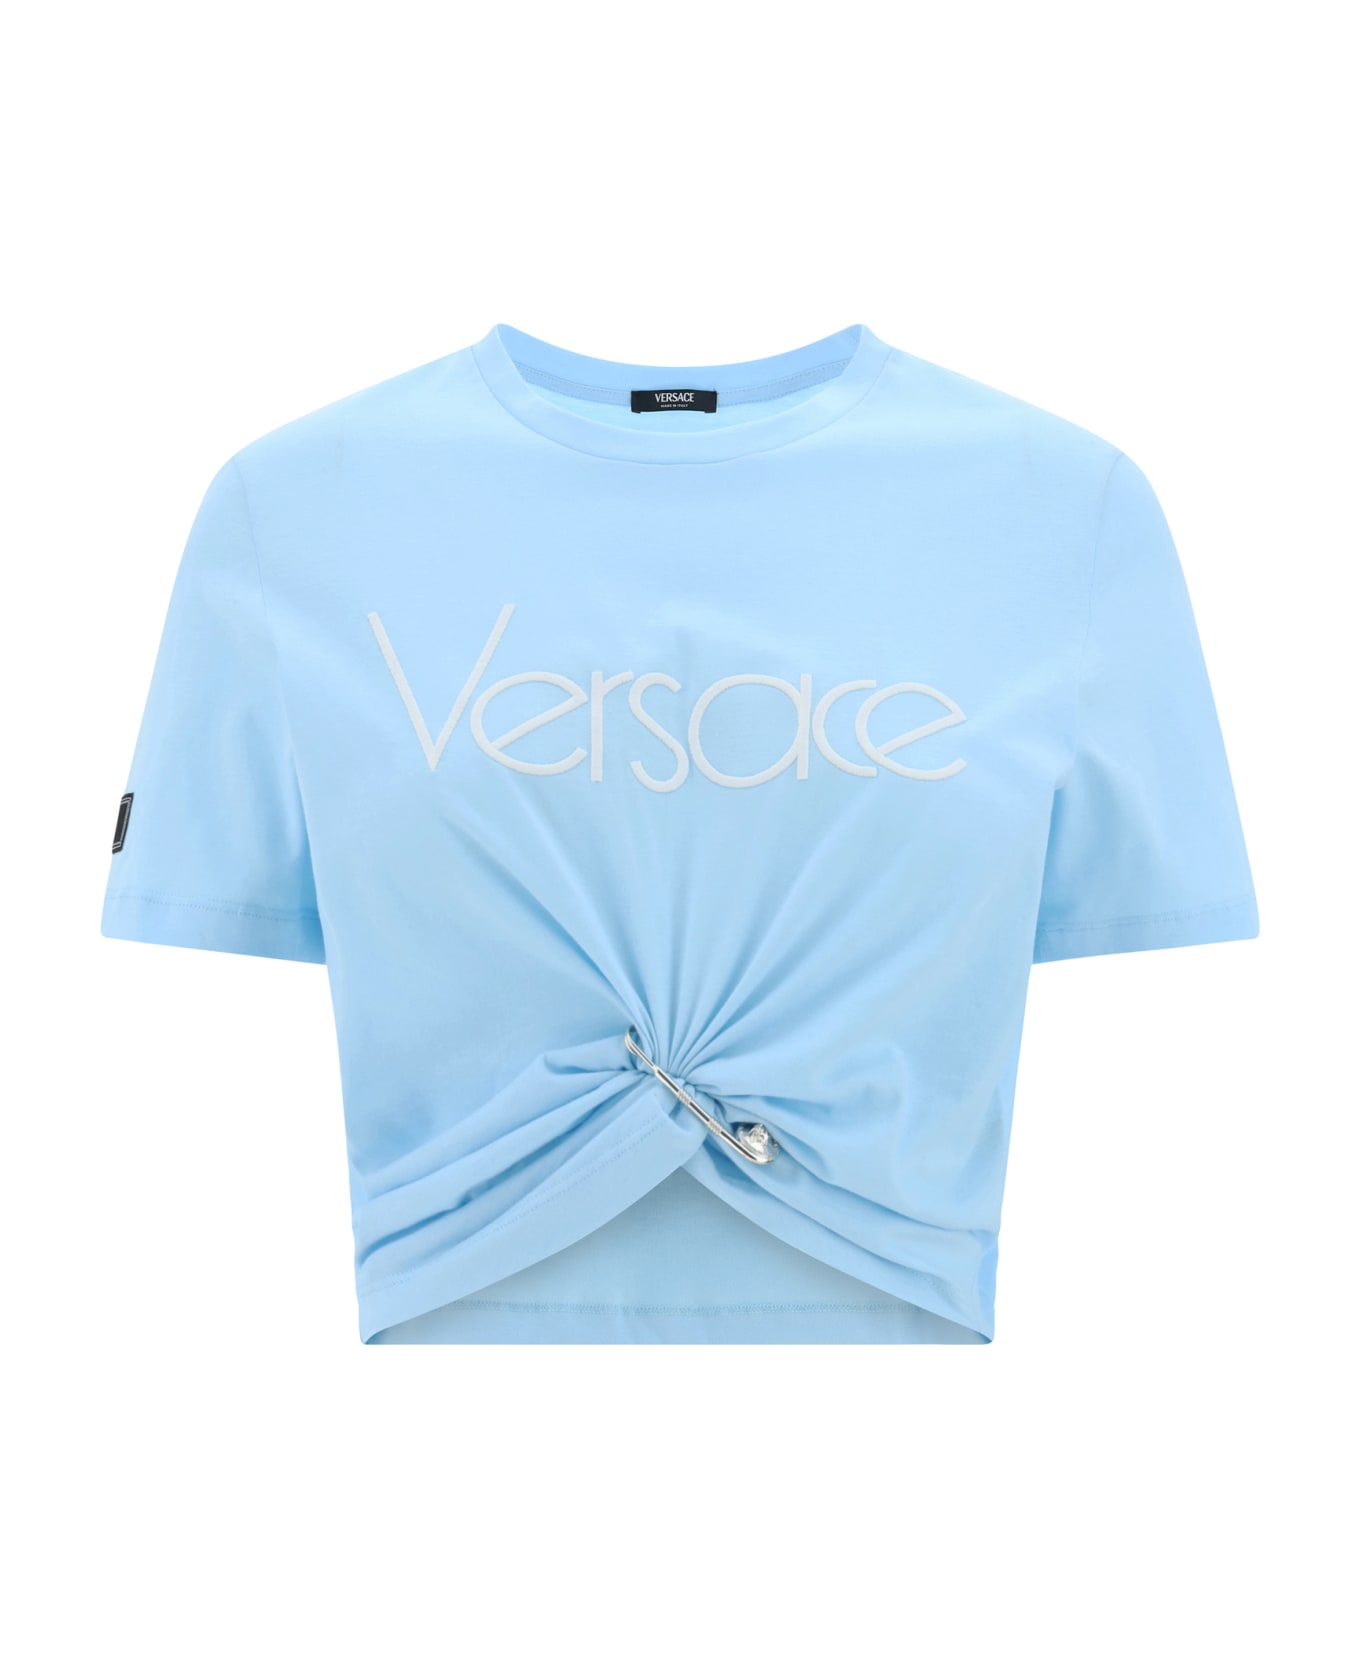 Versace Safety Pin Detail Top - Blue Tシャツ